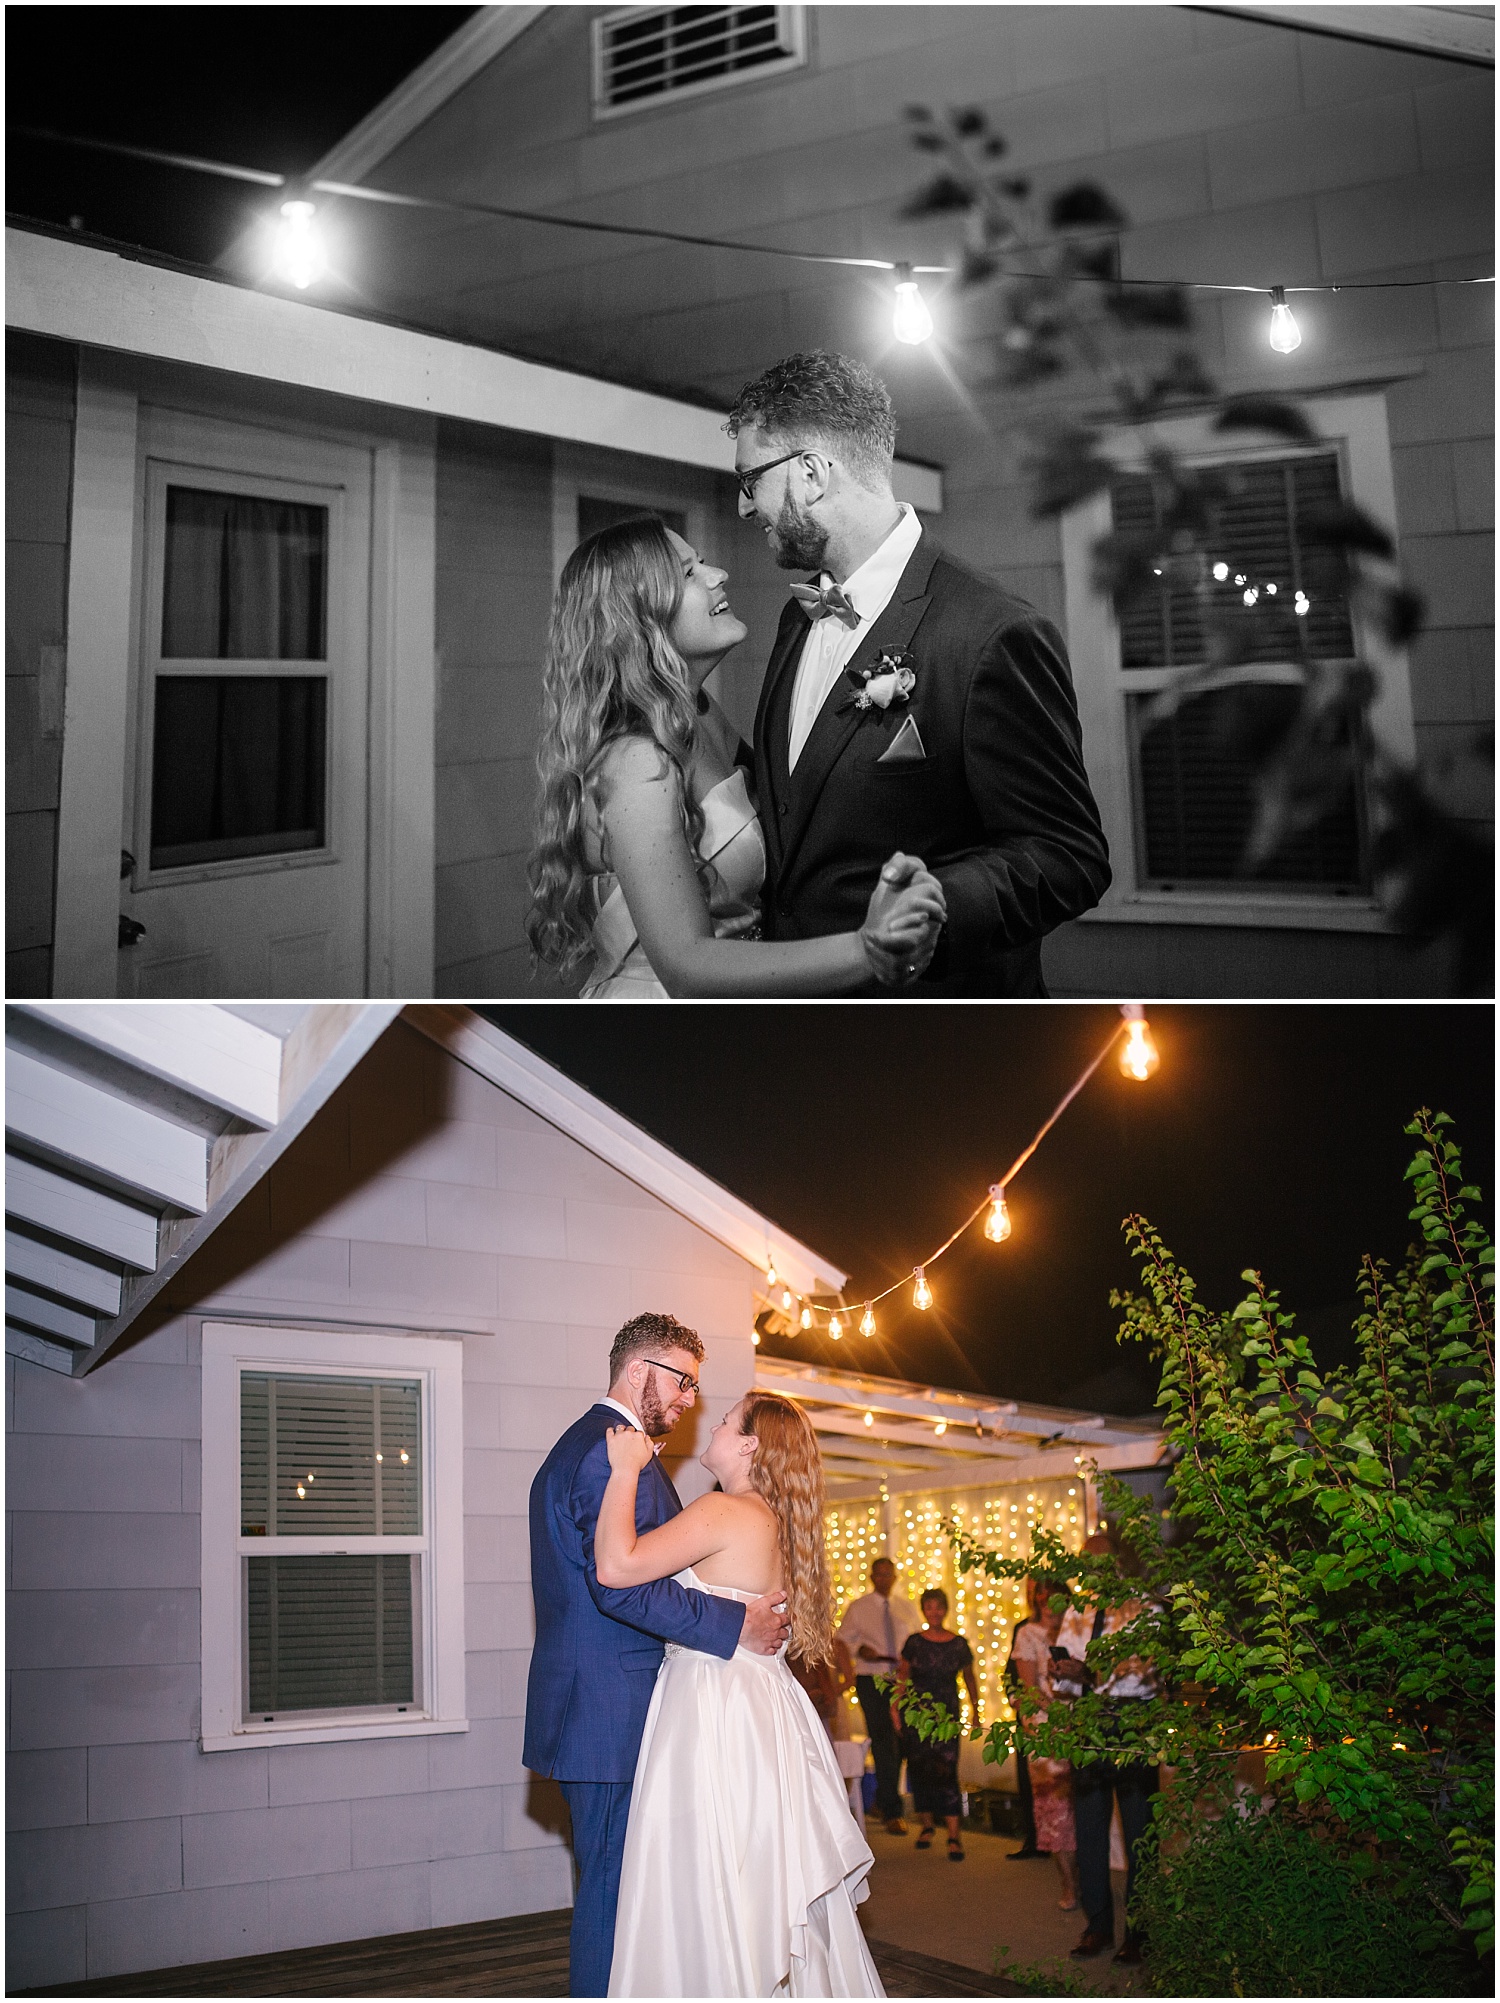 Bride and groom's first dance at their intimate backyard wedding celebration